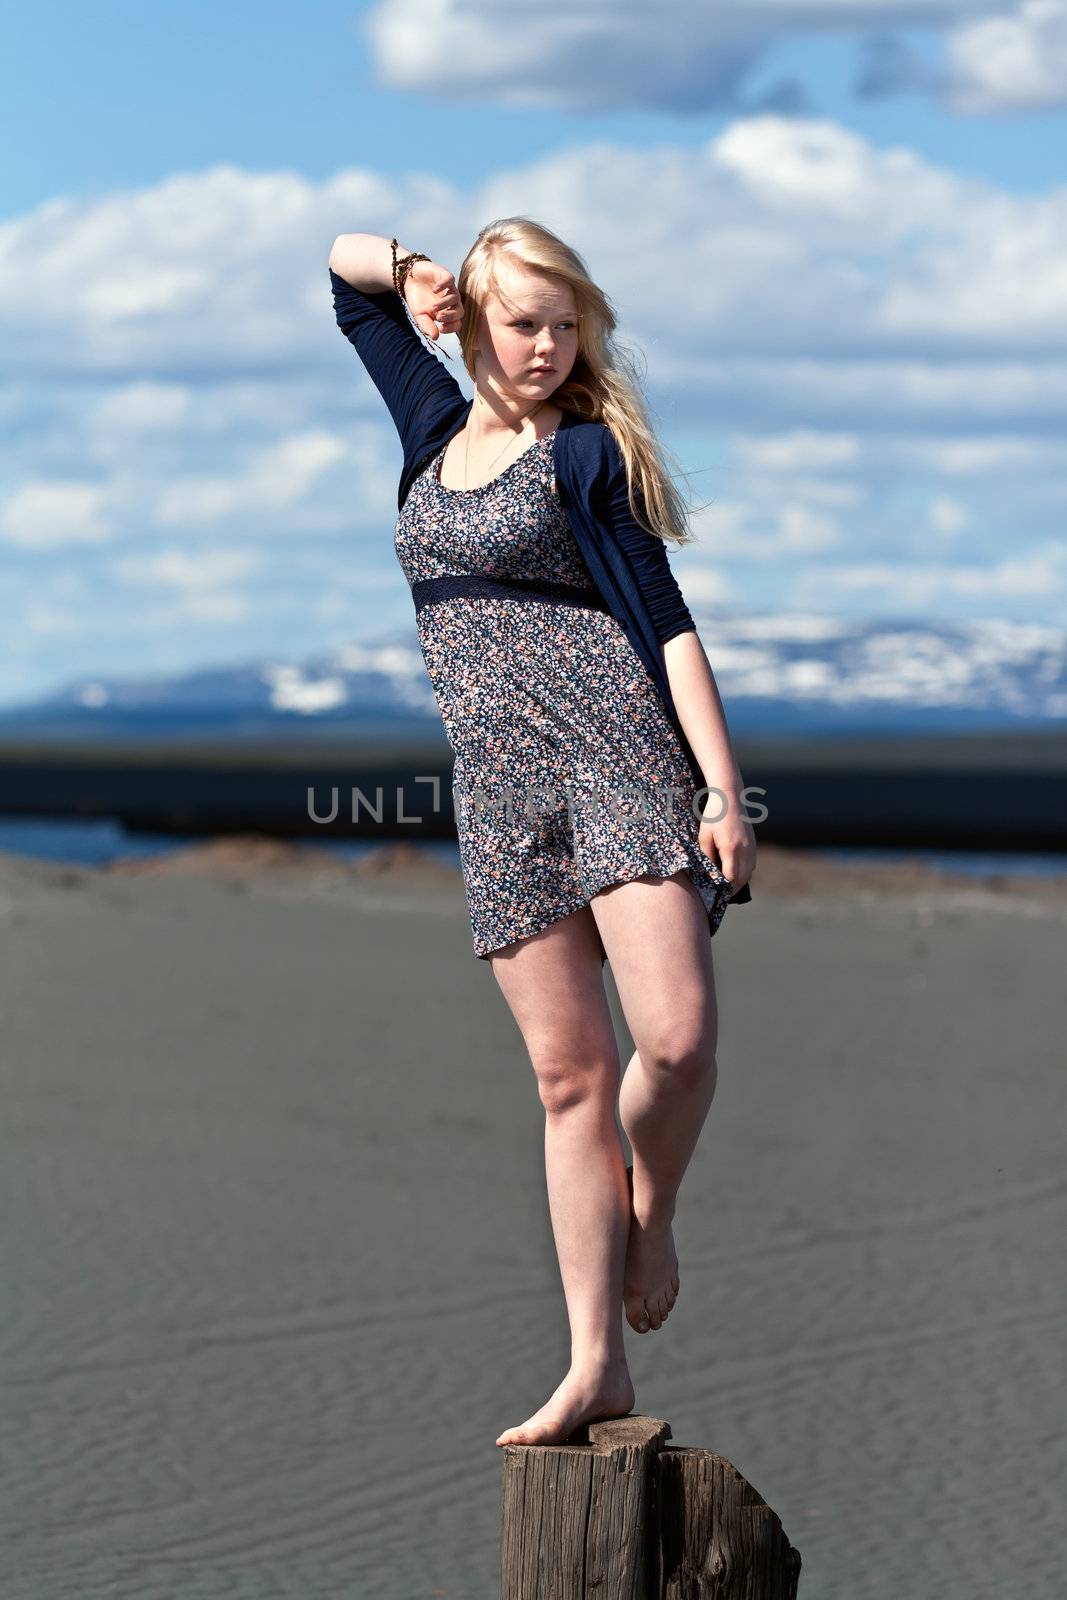 girl standing on one leg on a wooden post against the sky and mountains